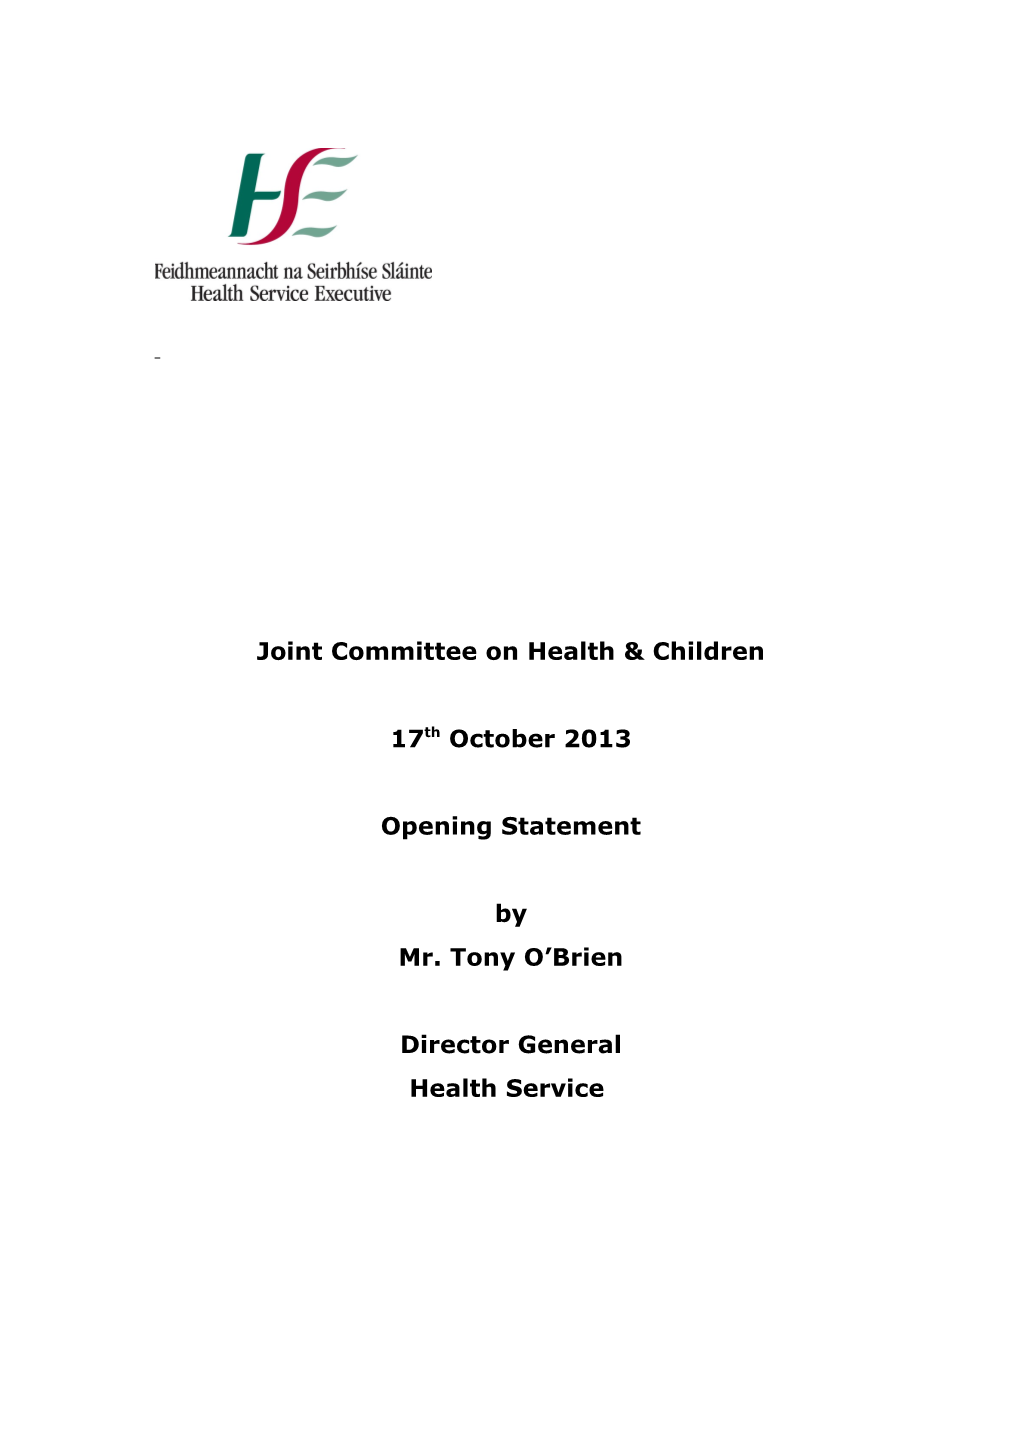 Opening Statement Re NCHD Terms & Conditions - JCHC 5Th March 13 s1